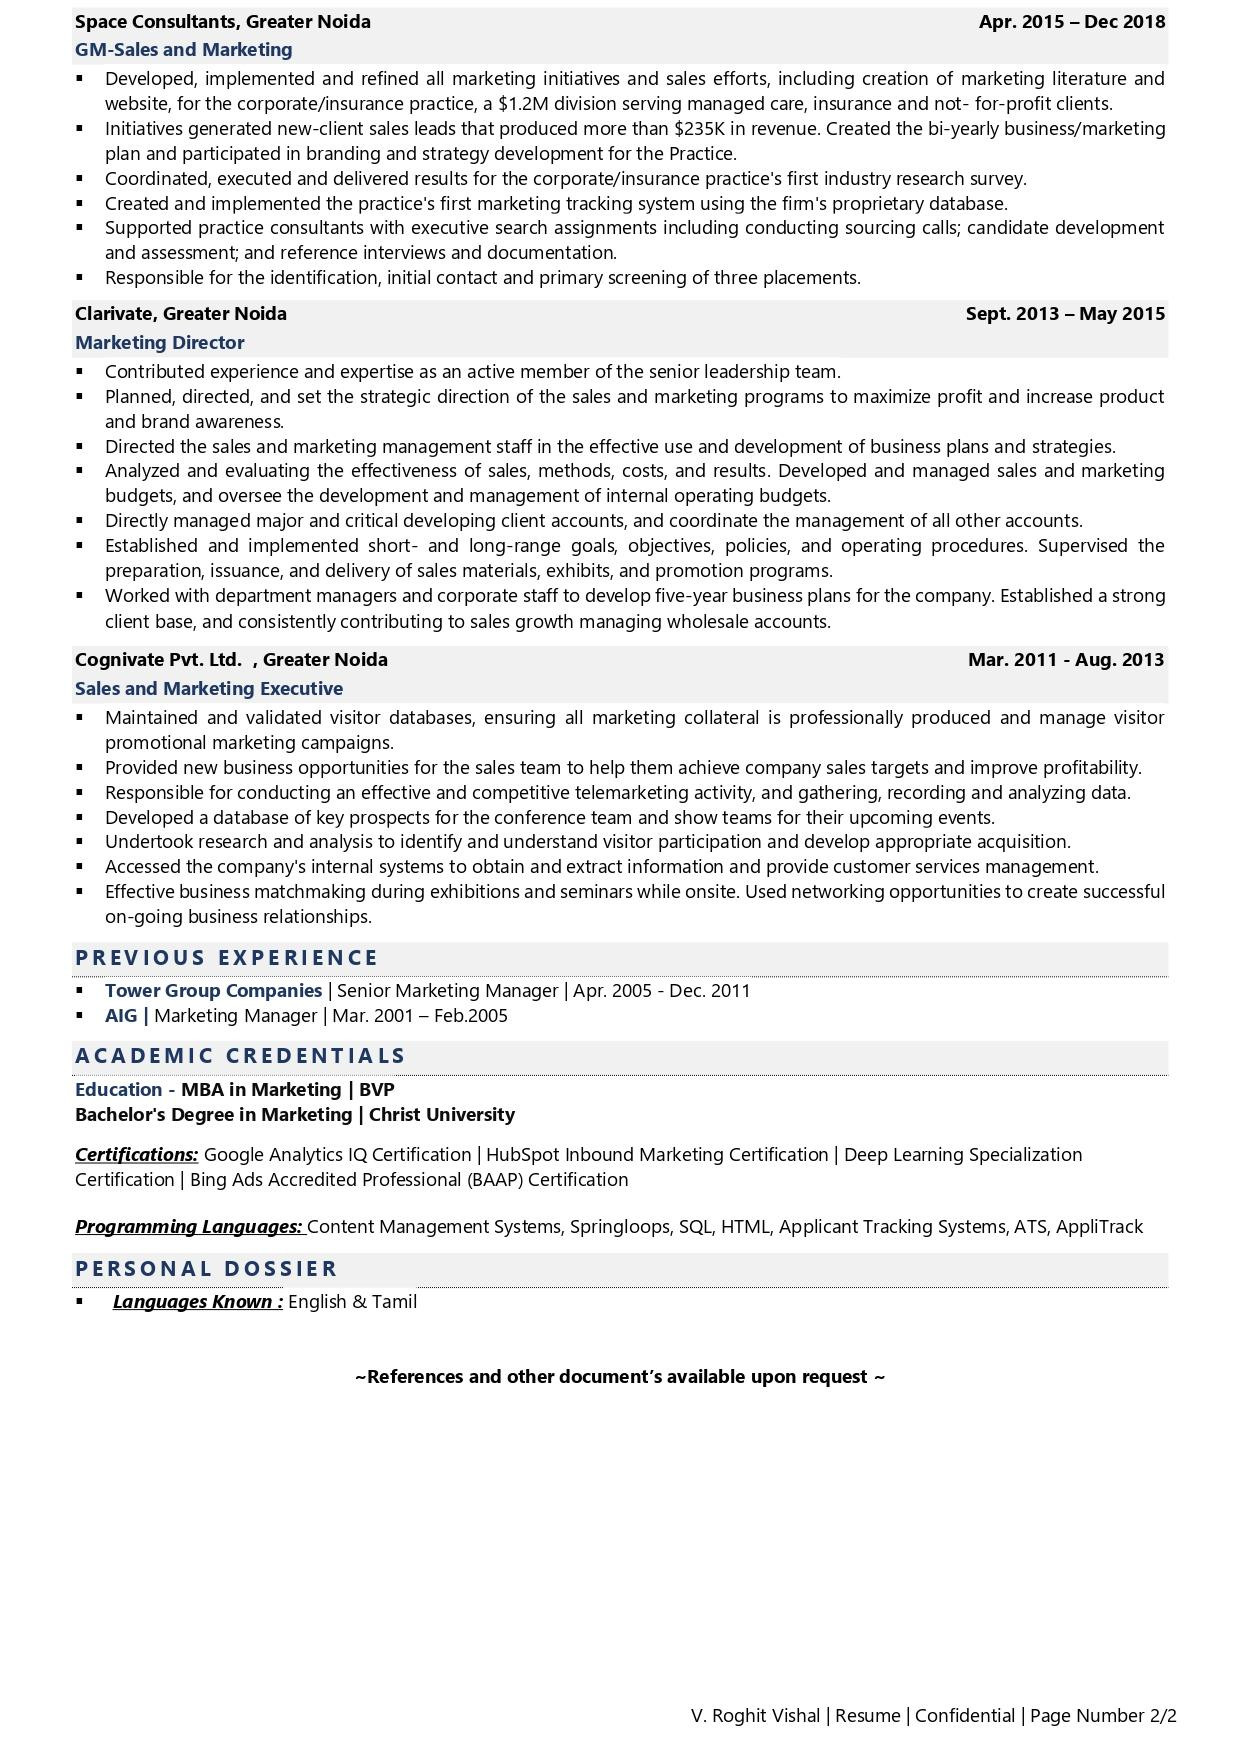 Resume Samples In Sales and Marketing Gm â Sales & Marketing Resume Examples & Template (with Job …